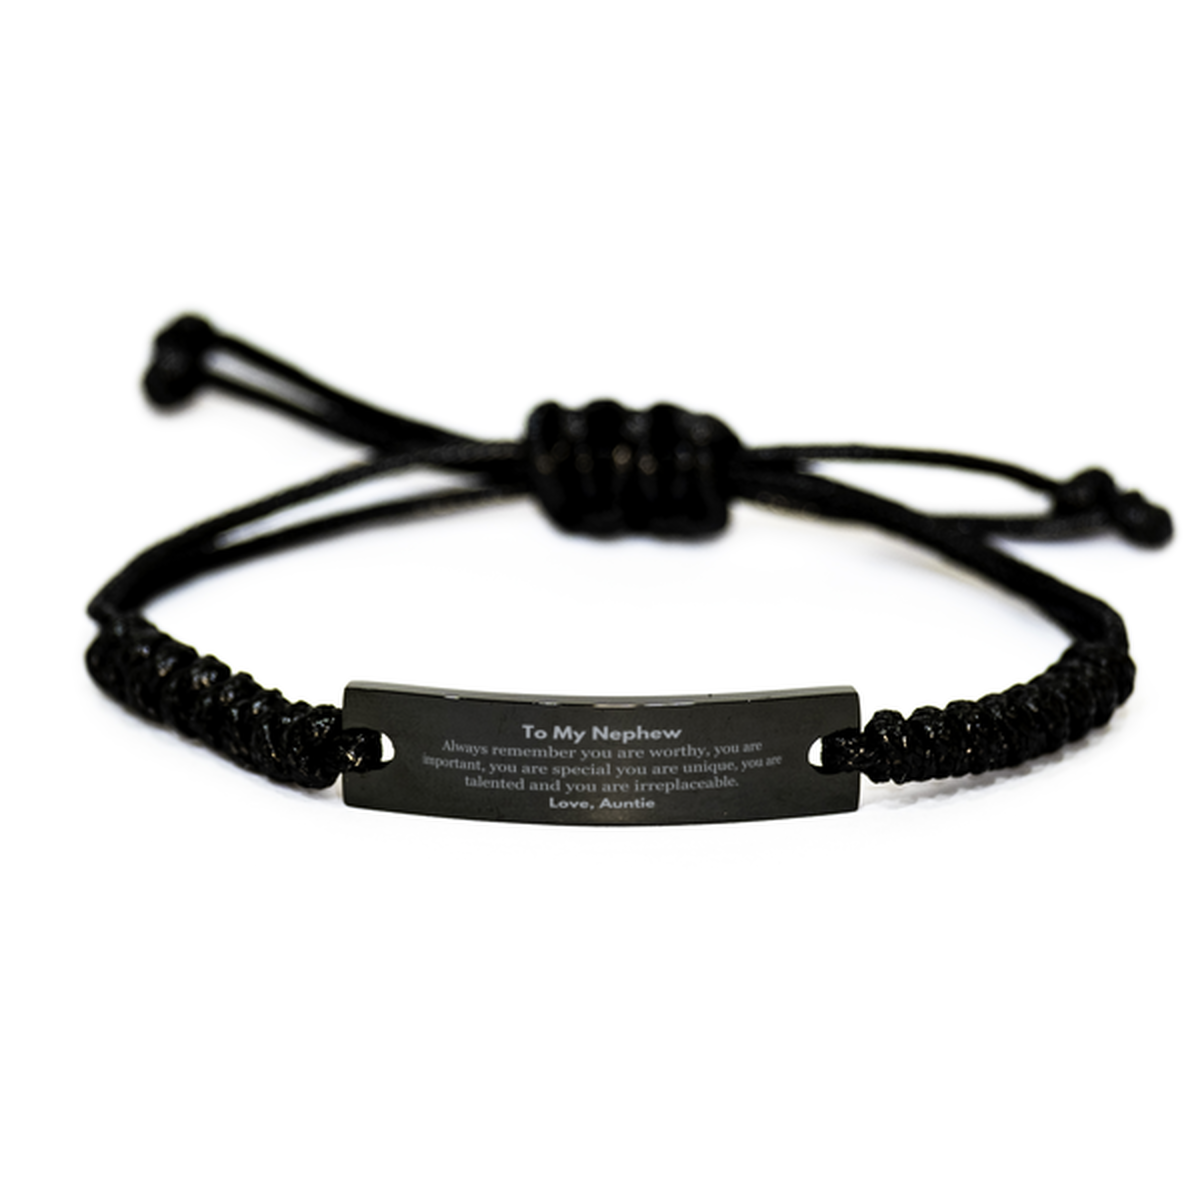 Nephew Birthday Gifts from Auntie, Inspirational Black Rope Bracelet for Nephew Christmas Graduation Gifts for Nephew Always remember you are worthy, you are important. Love, Auntie